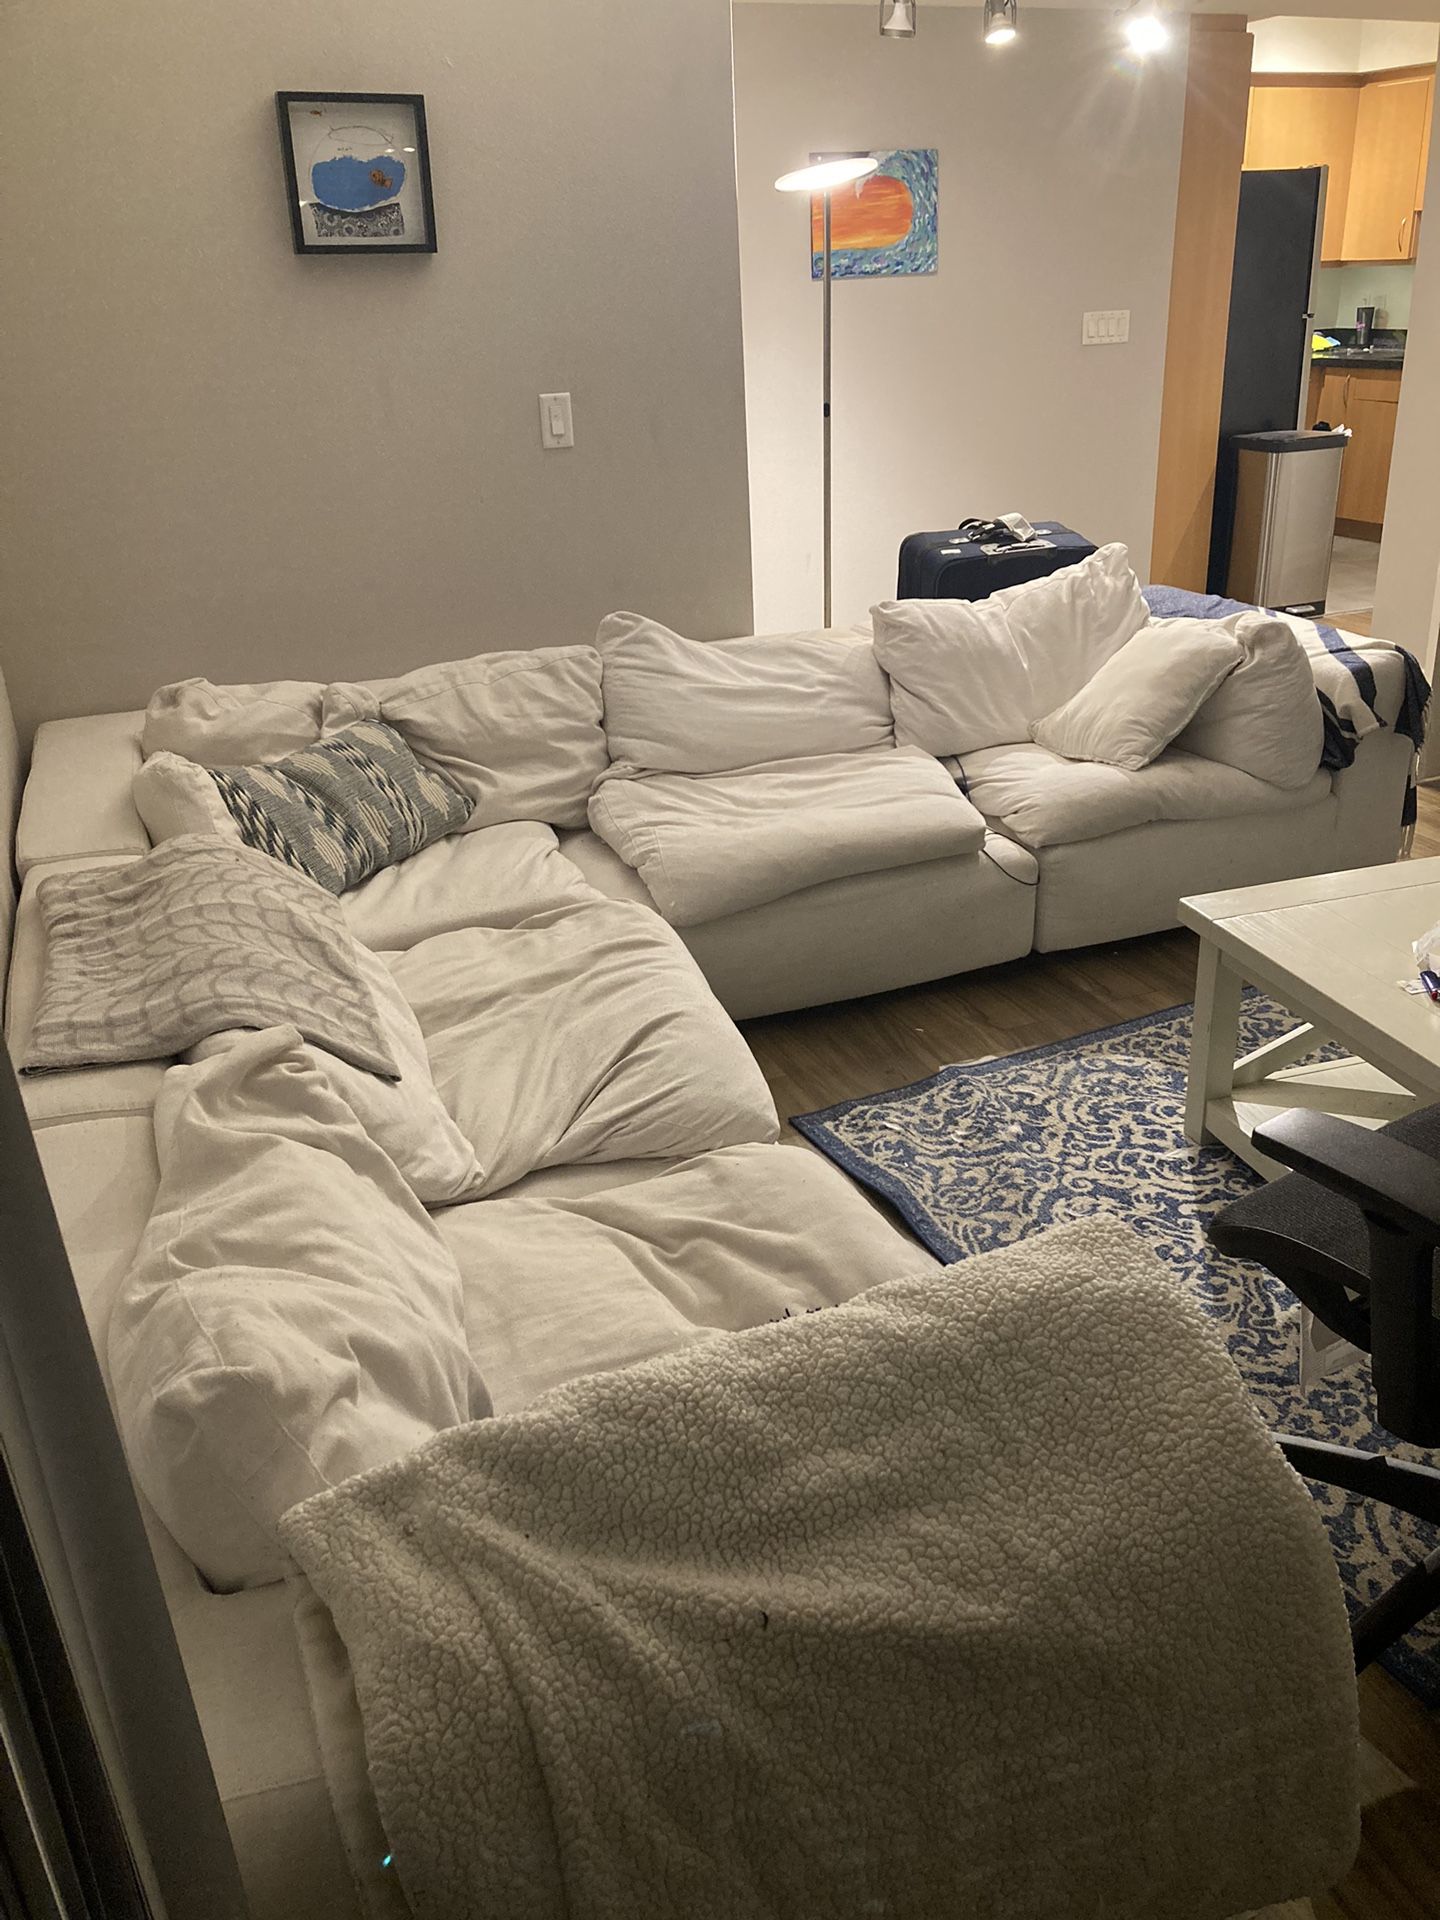 MASSIVE (easy to move) white sectional couch